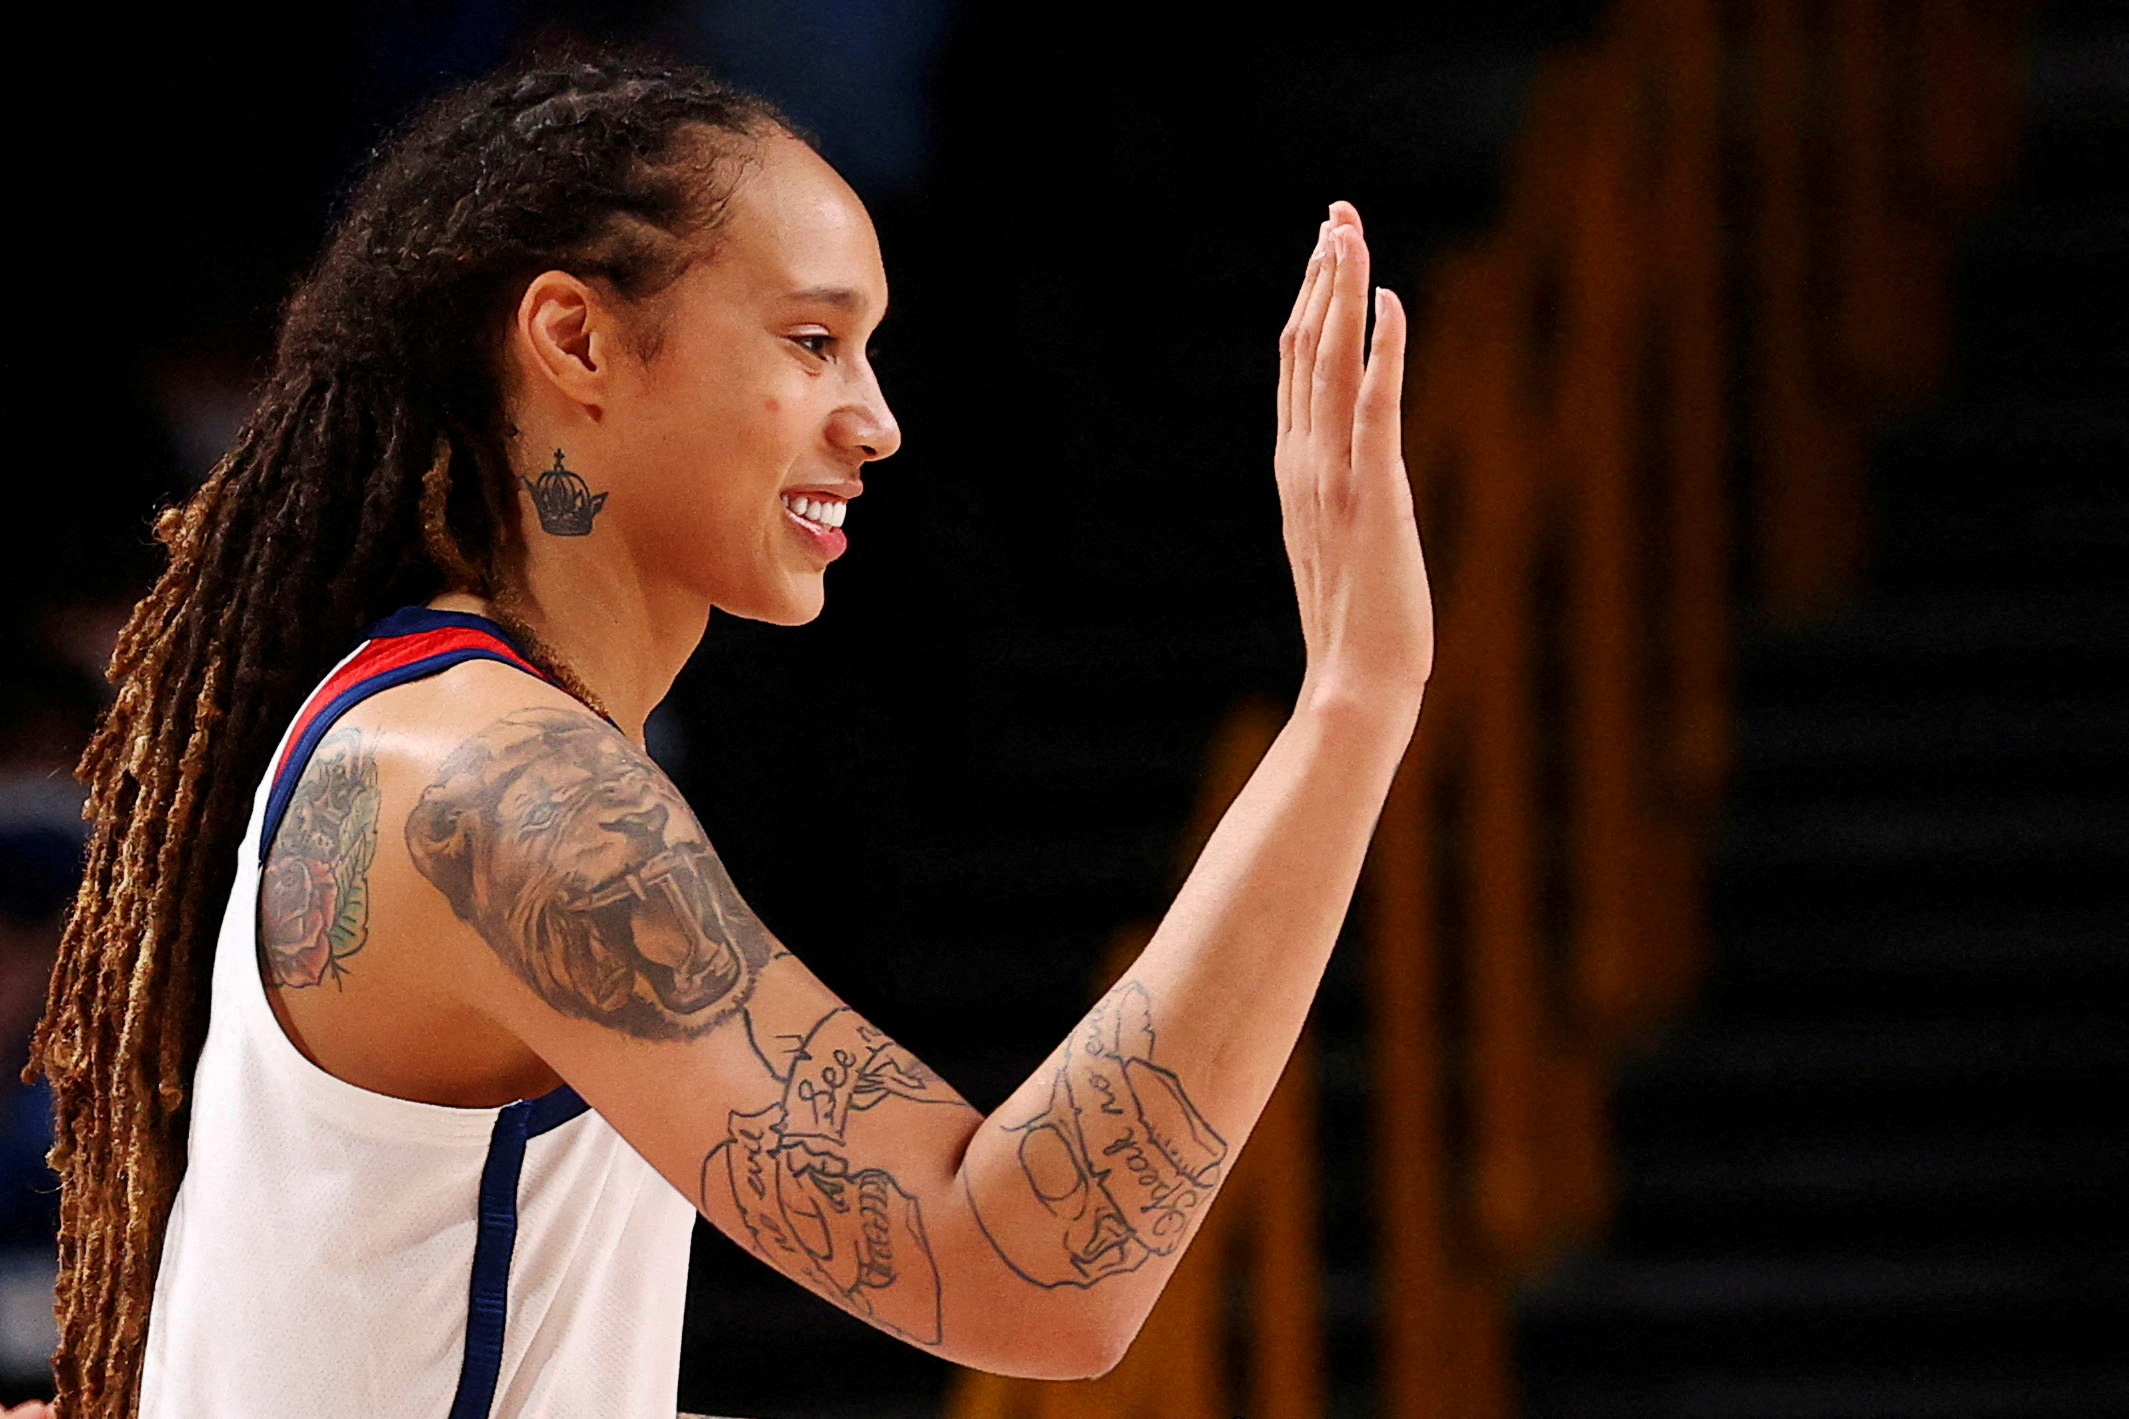 Brittney Griner of the United States congratulates a team mate during their Women's Basketball Gold Medal game against Japan at the Tokyo 2020 Summer Olympics